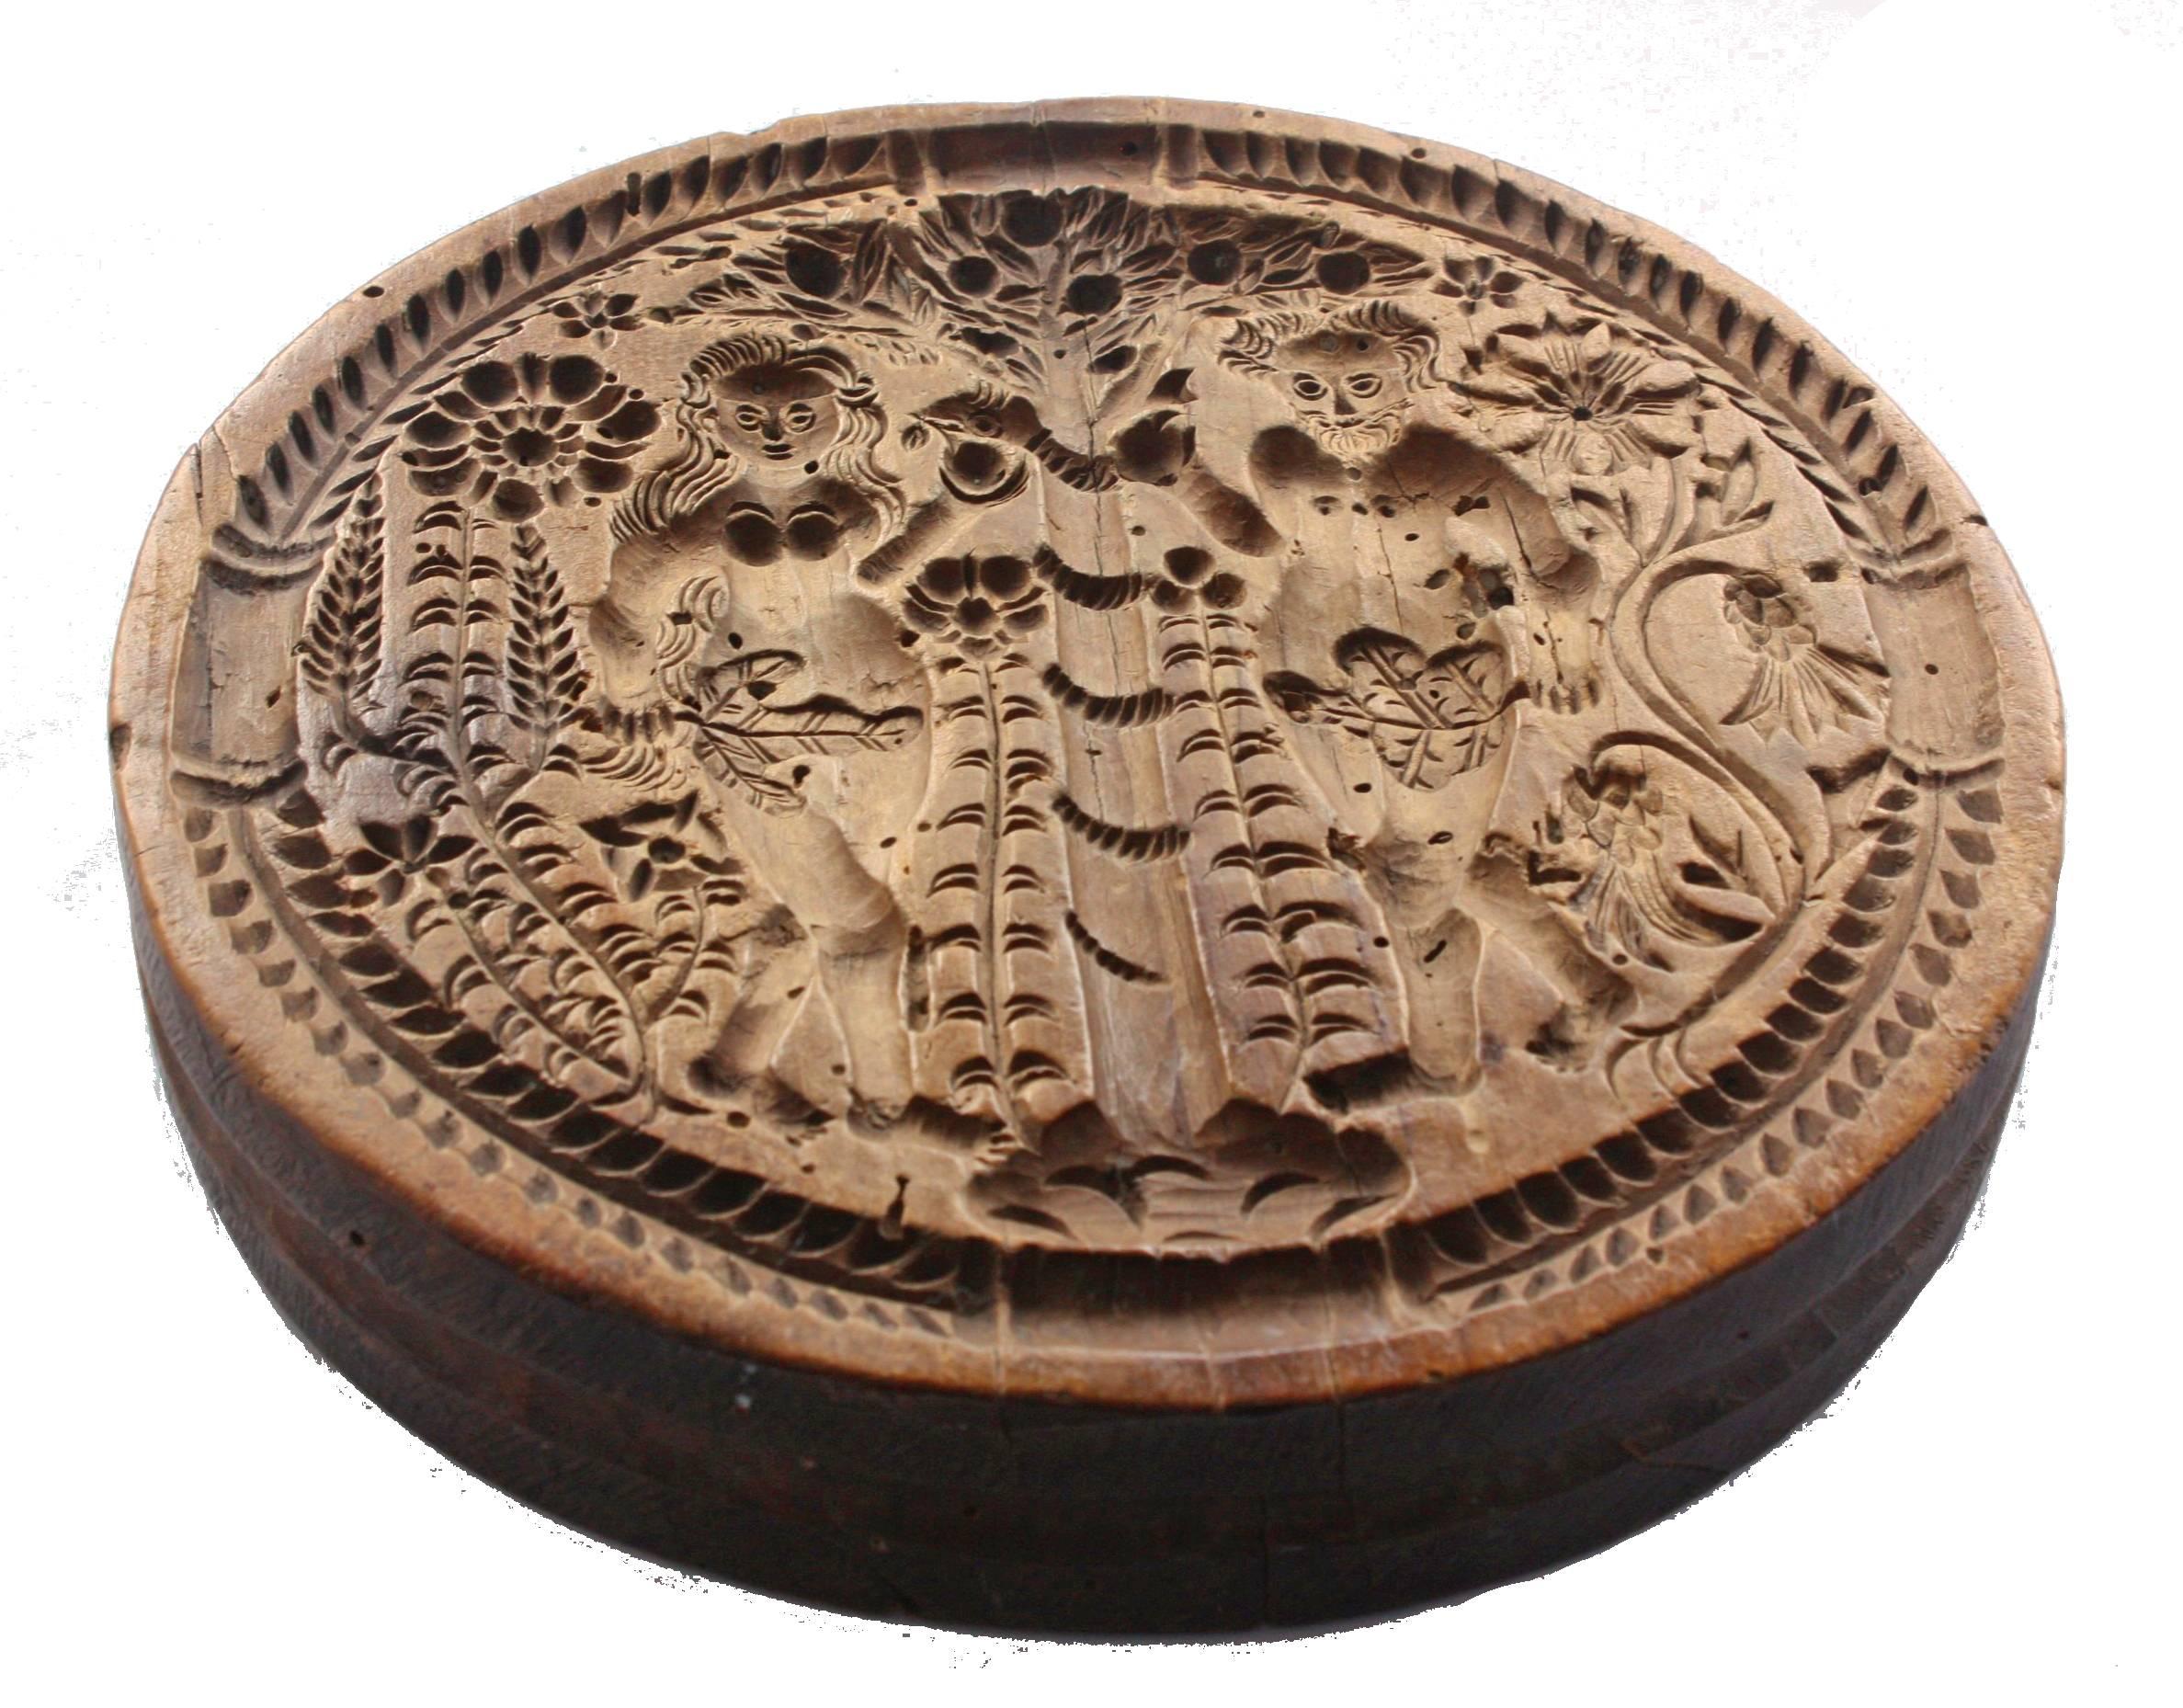 hand carved wooden cookie molds